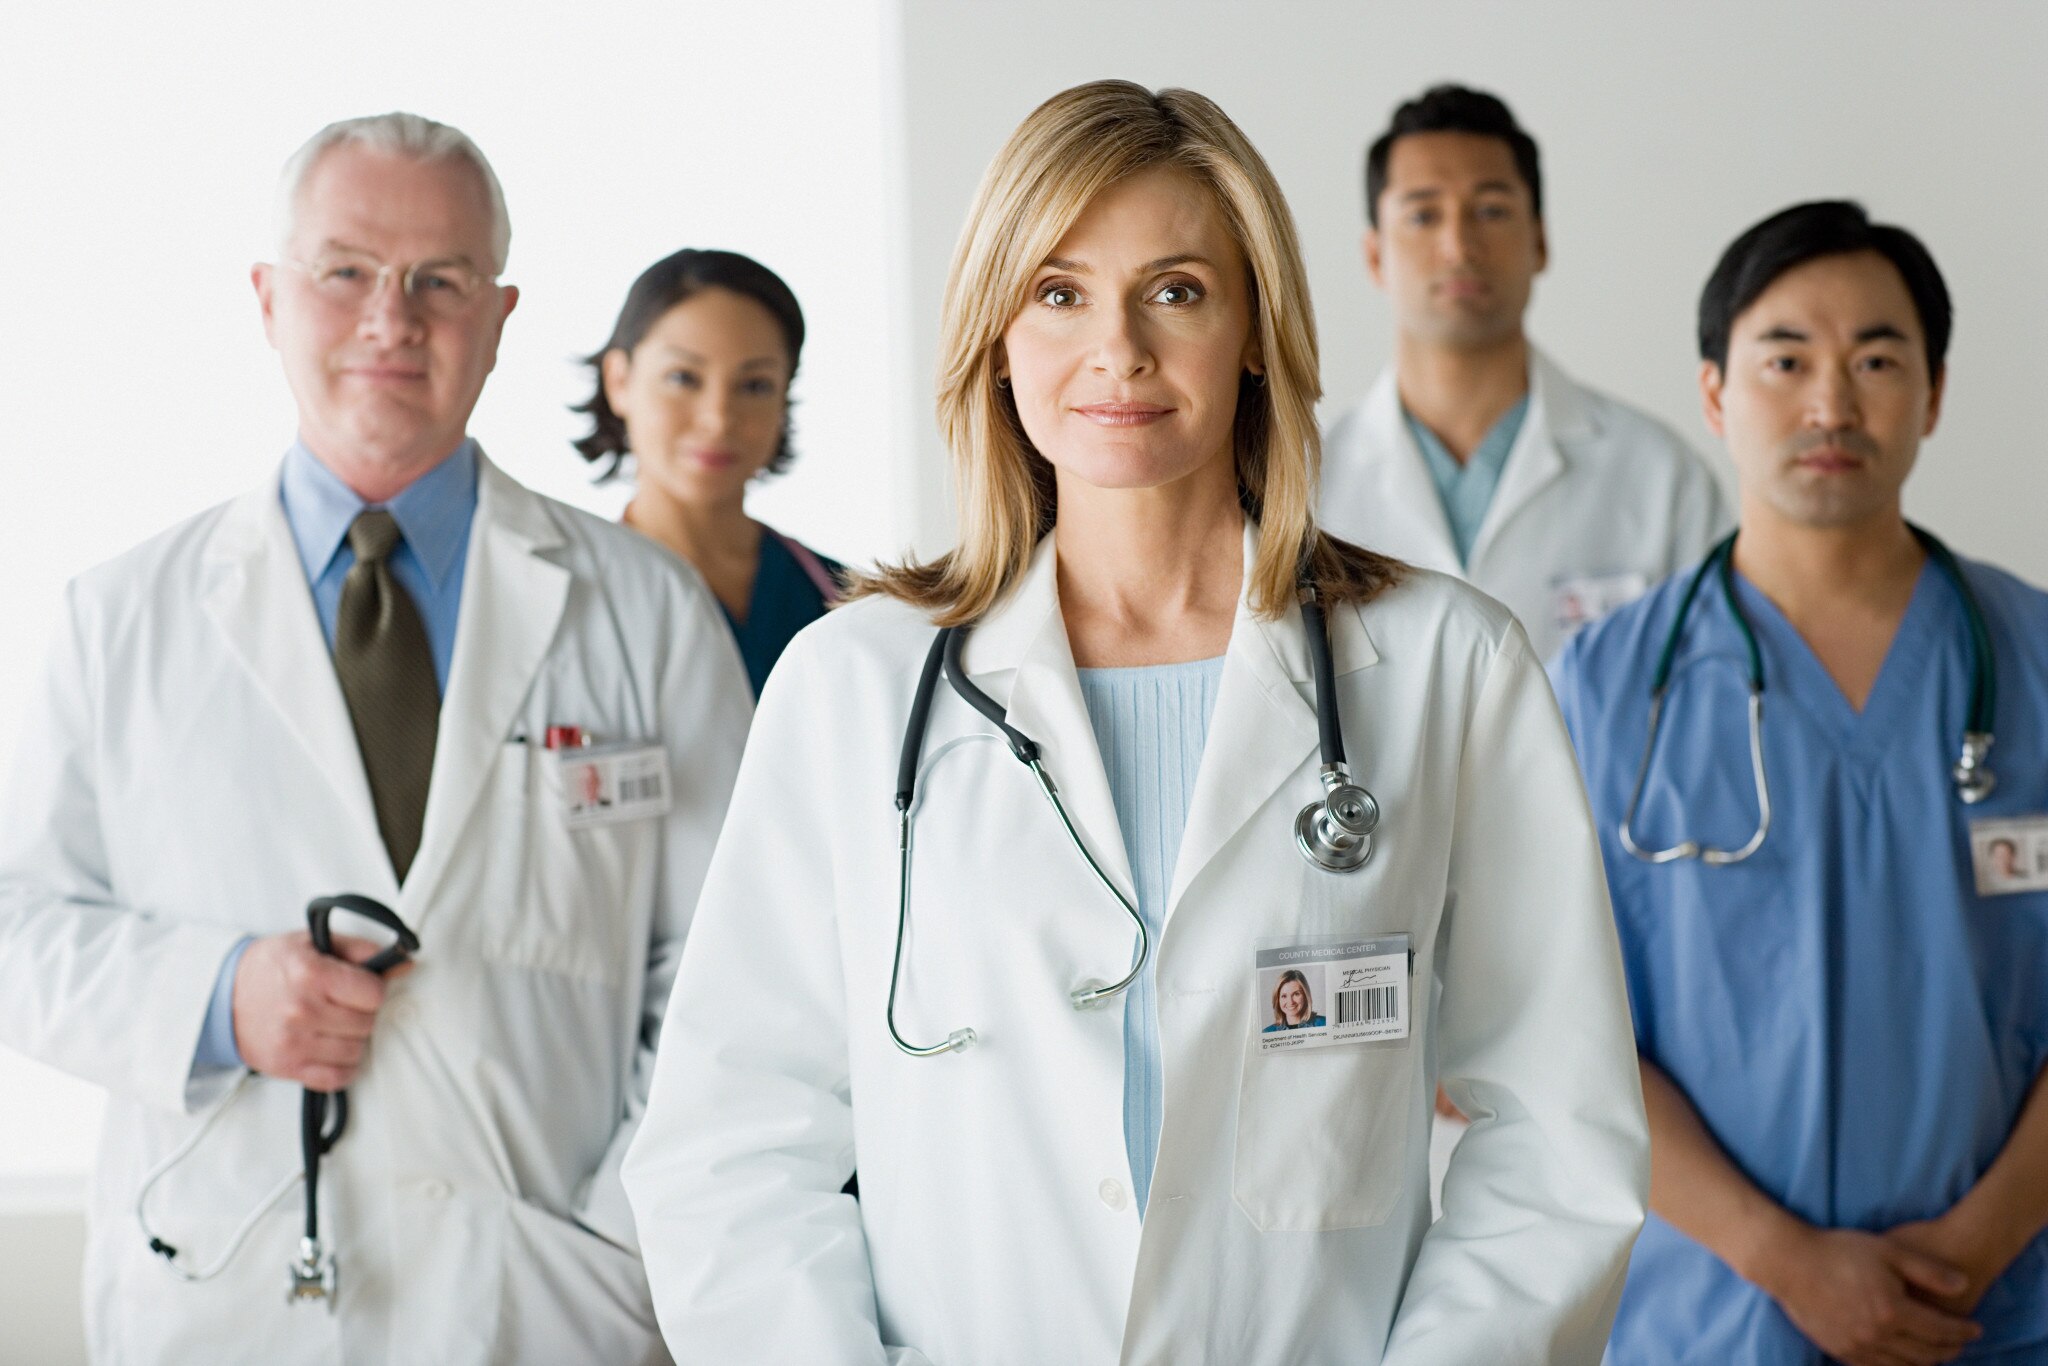 Clinicians in white coats